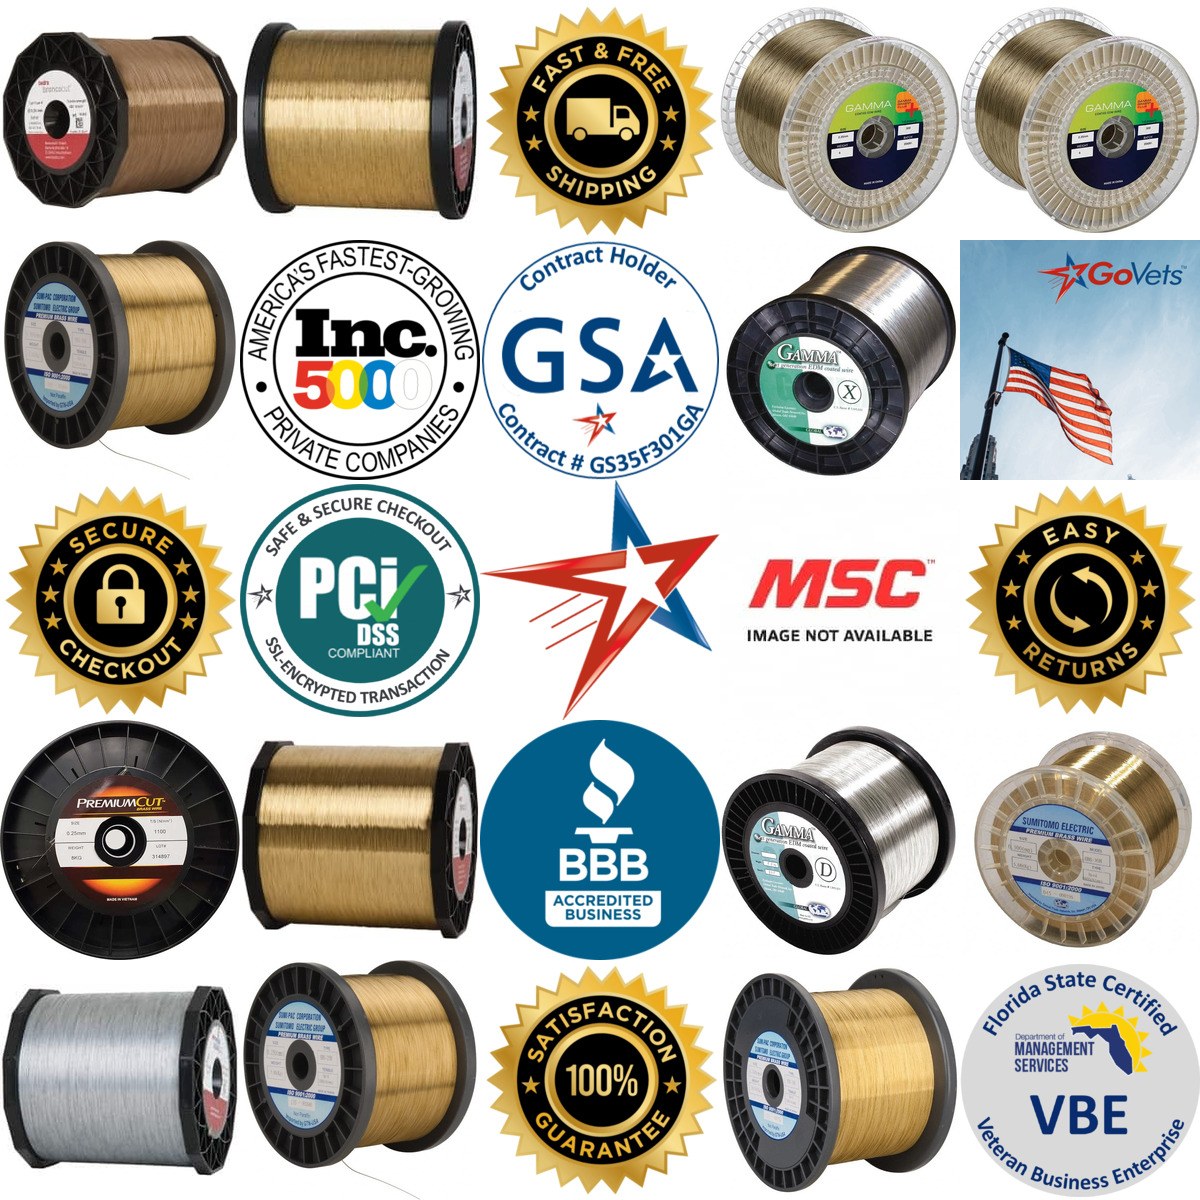 A selection of Electrical Discharge Machining Wire products on GoVets